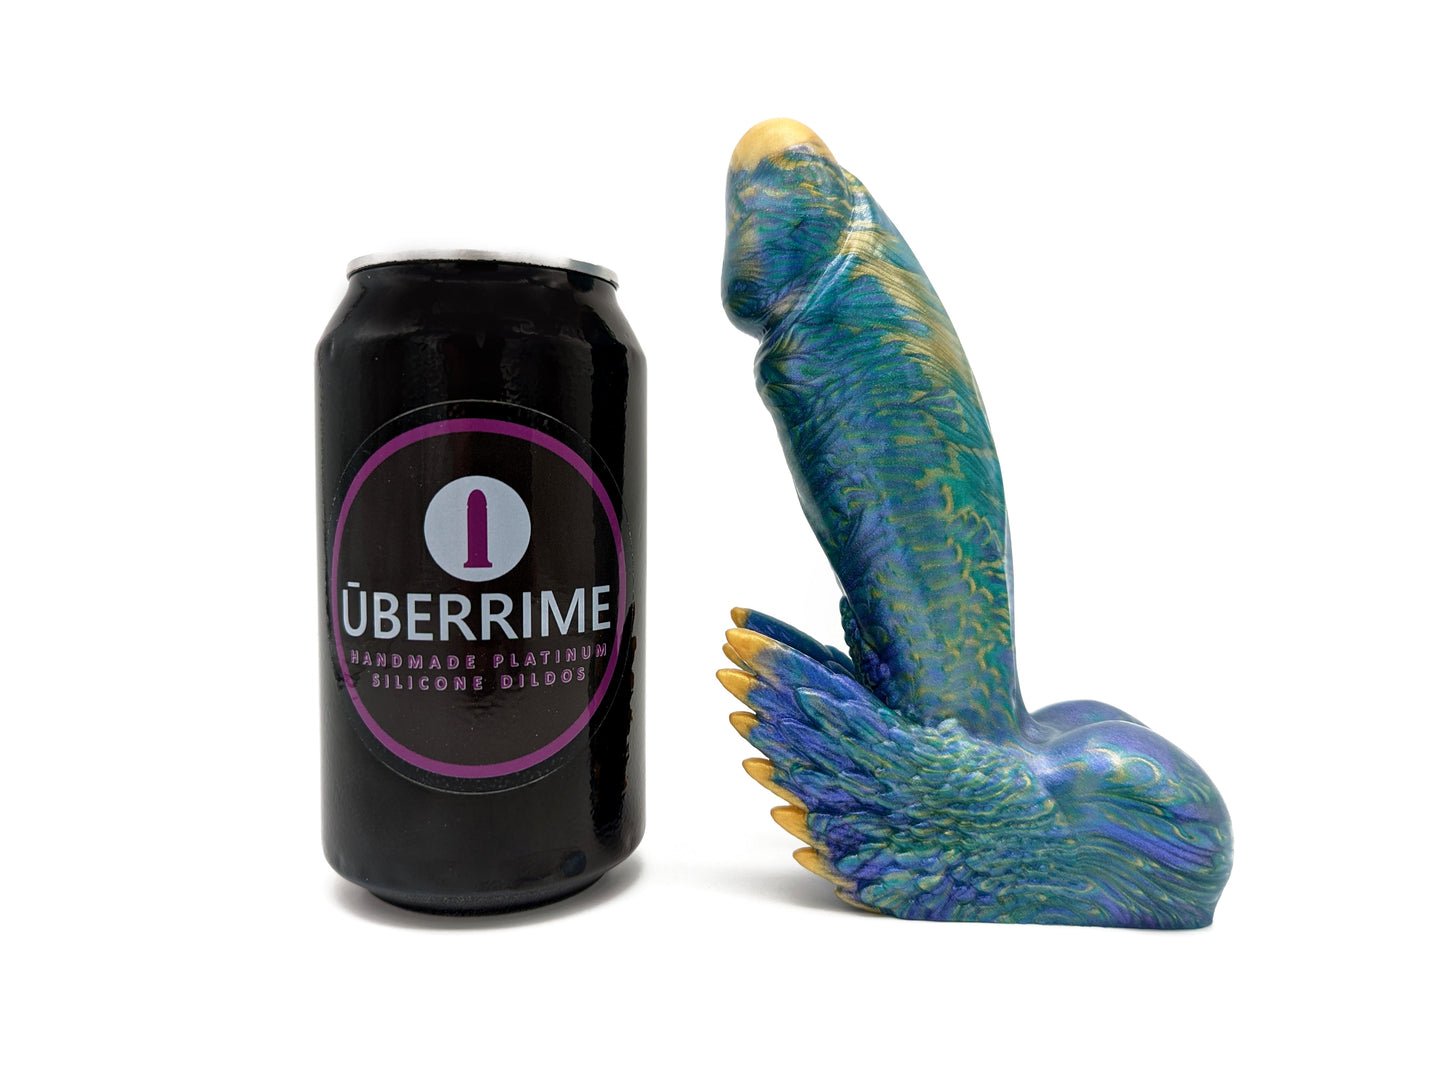 The Fascinus Winged Dildo - Small Size